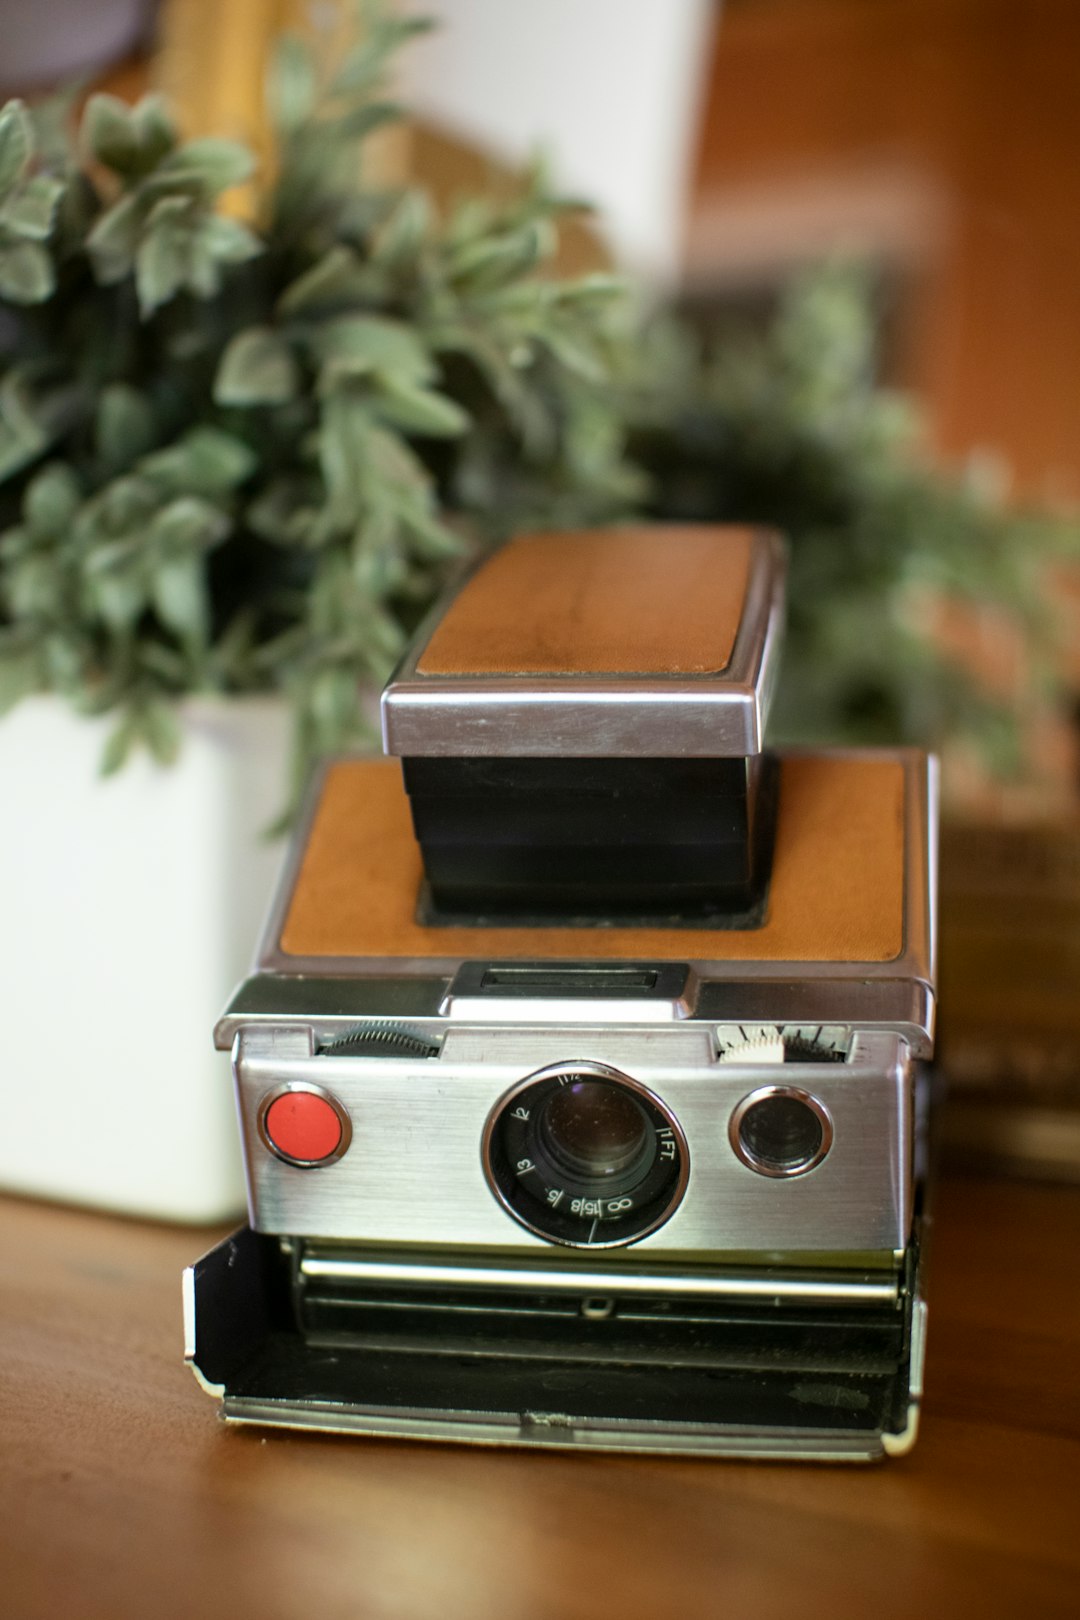 Vintage Polaroid SX-70 retro camera with supple brown cow hide and chrome metal details sits atop a wooden table, next to a potted green plant.